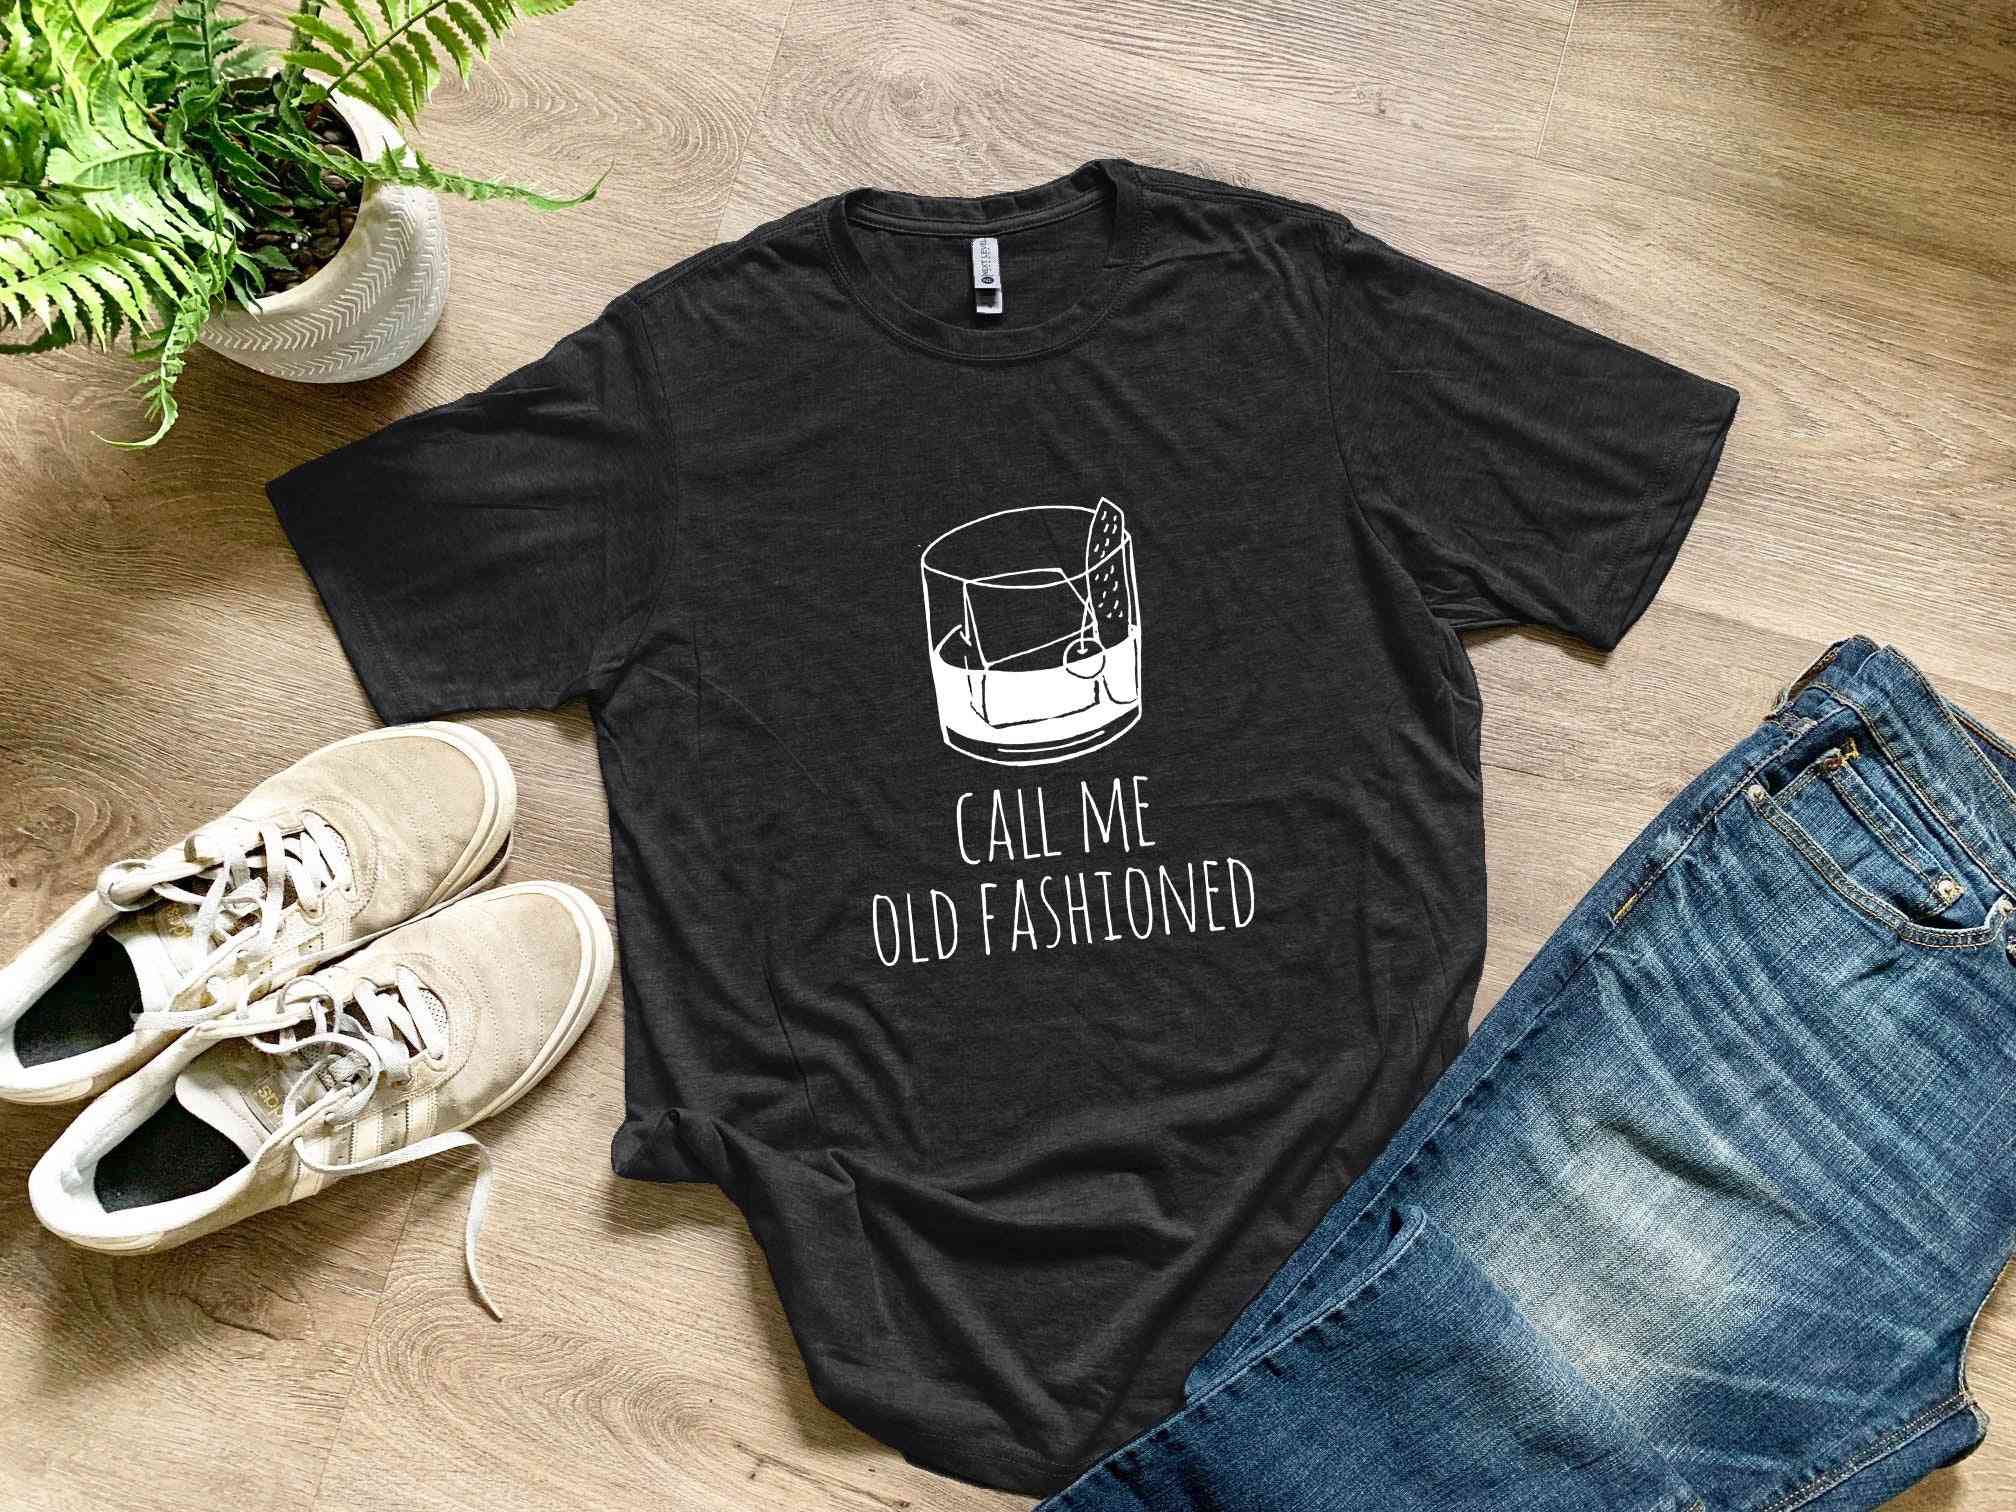 Call Me Old Fashioned - Men's Tee